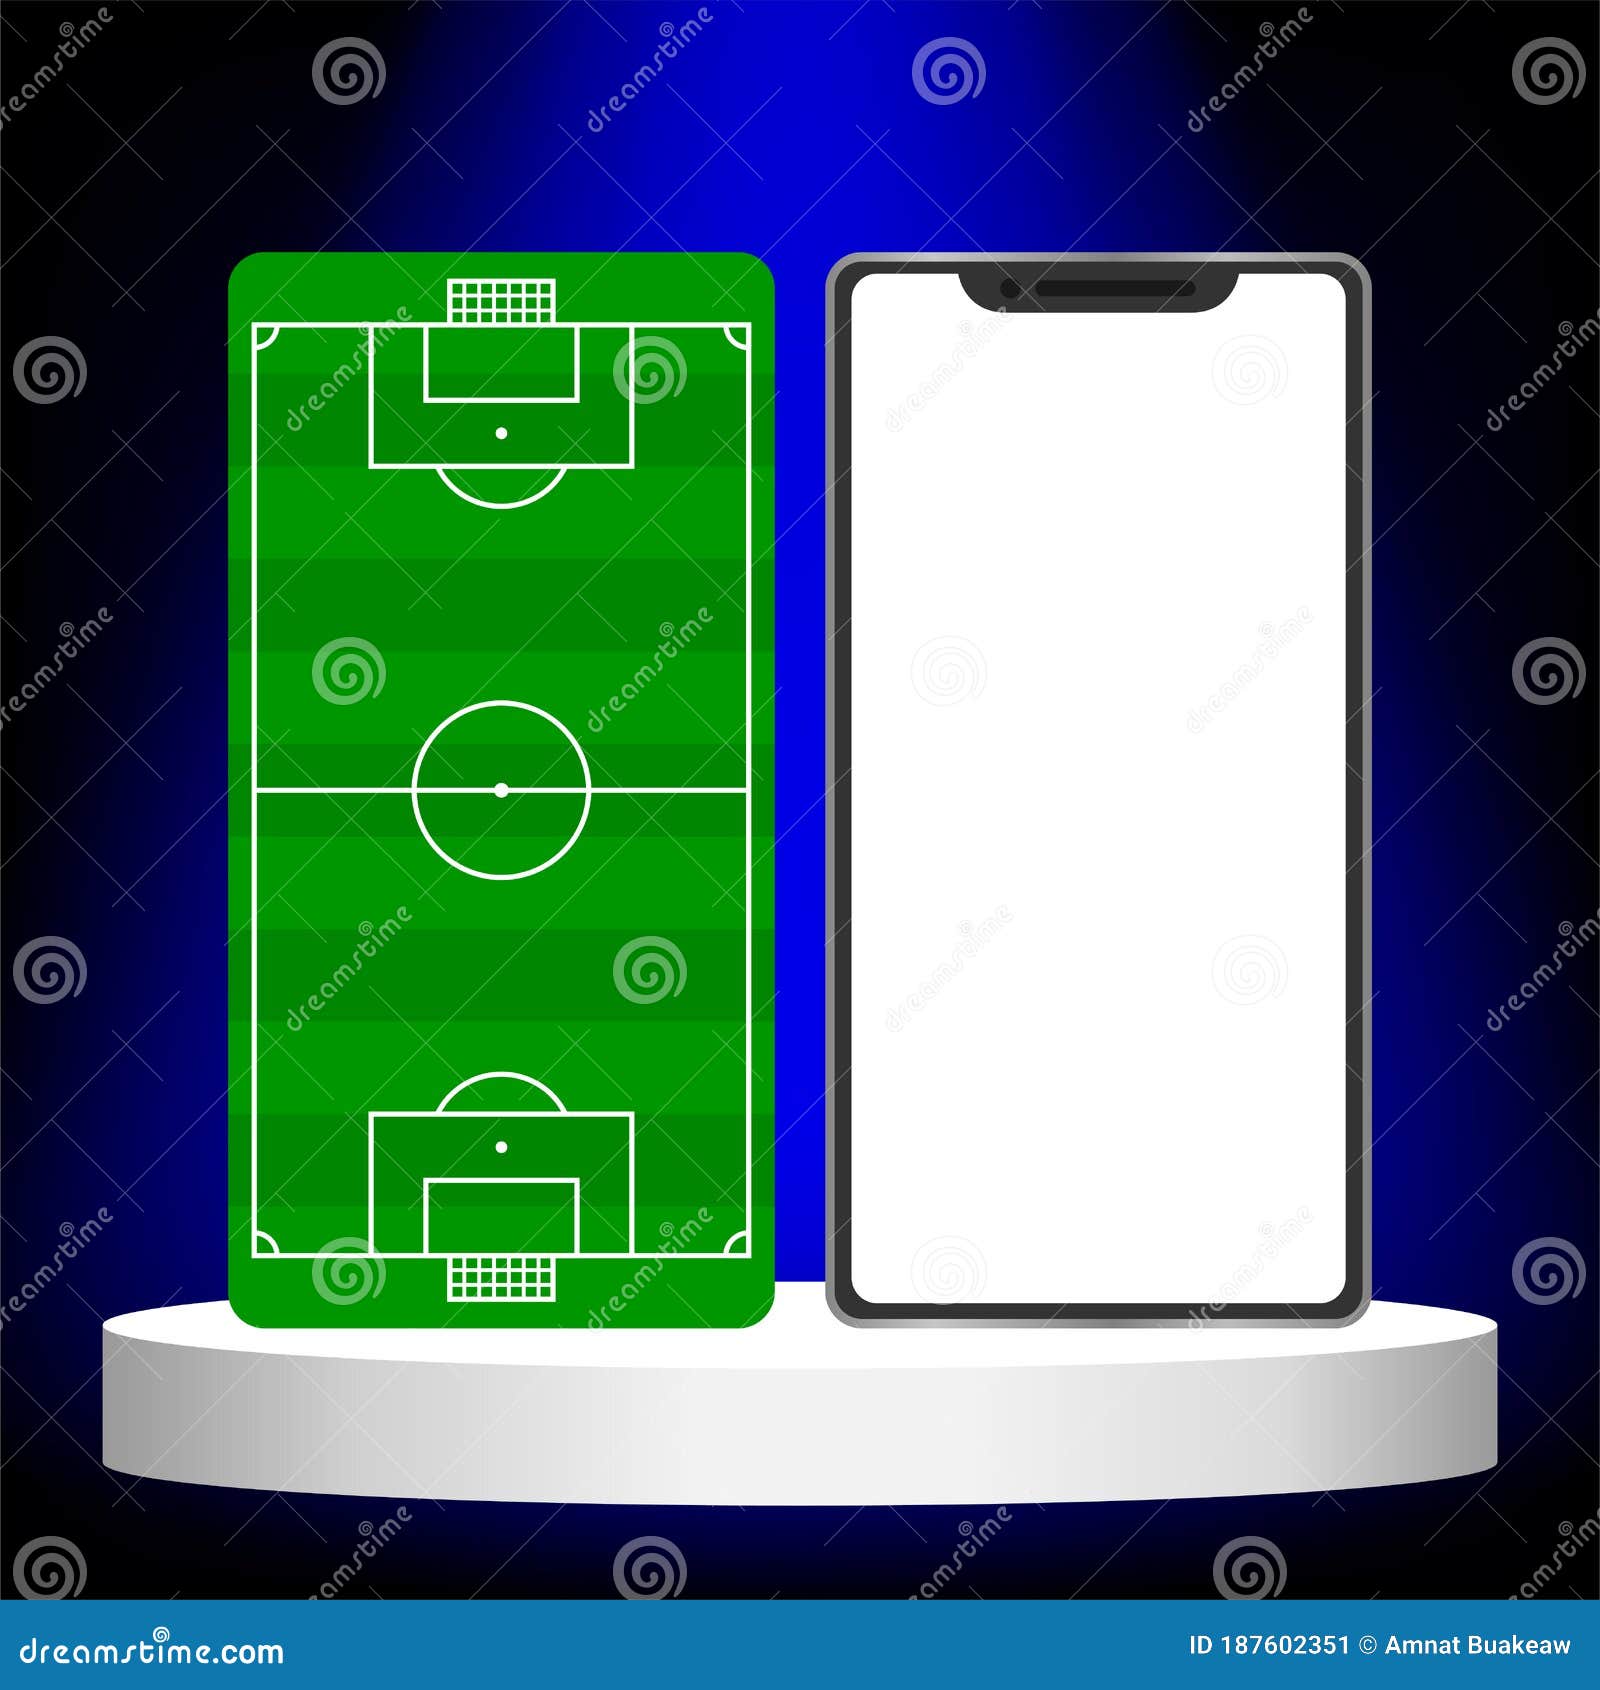 Smartphone Digital Screen Blank and Football Field, Template for Throughout Blank Football Field Template